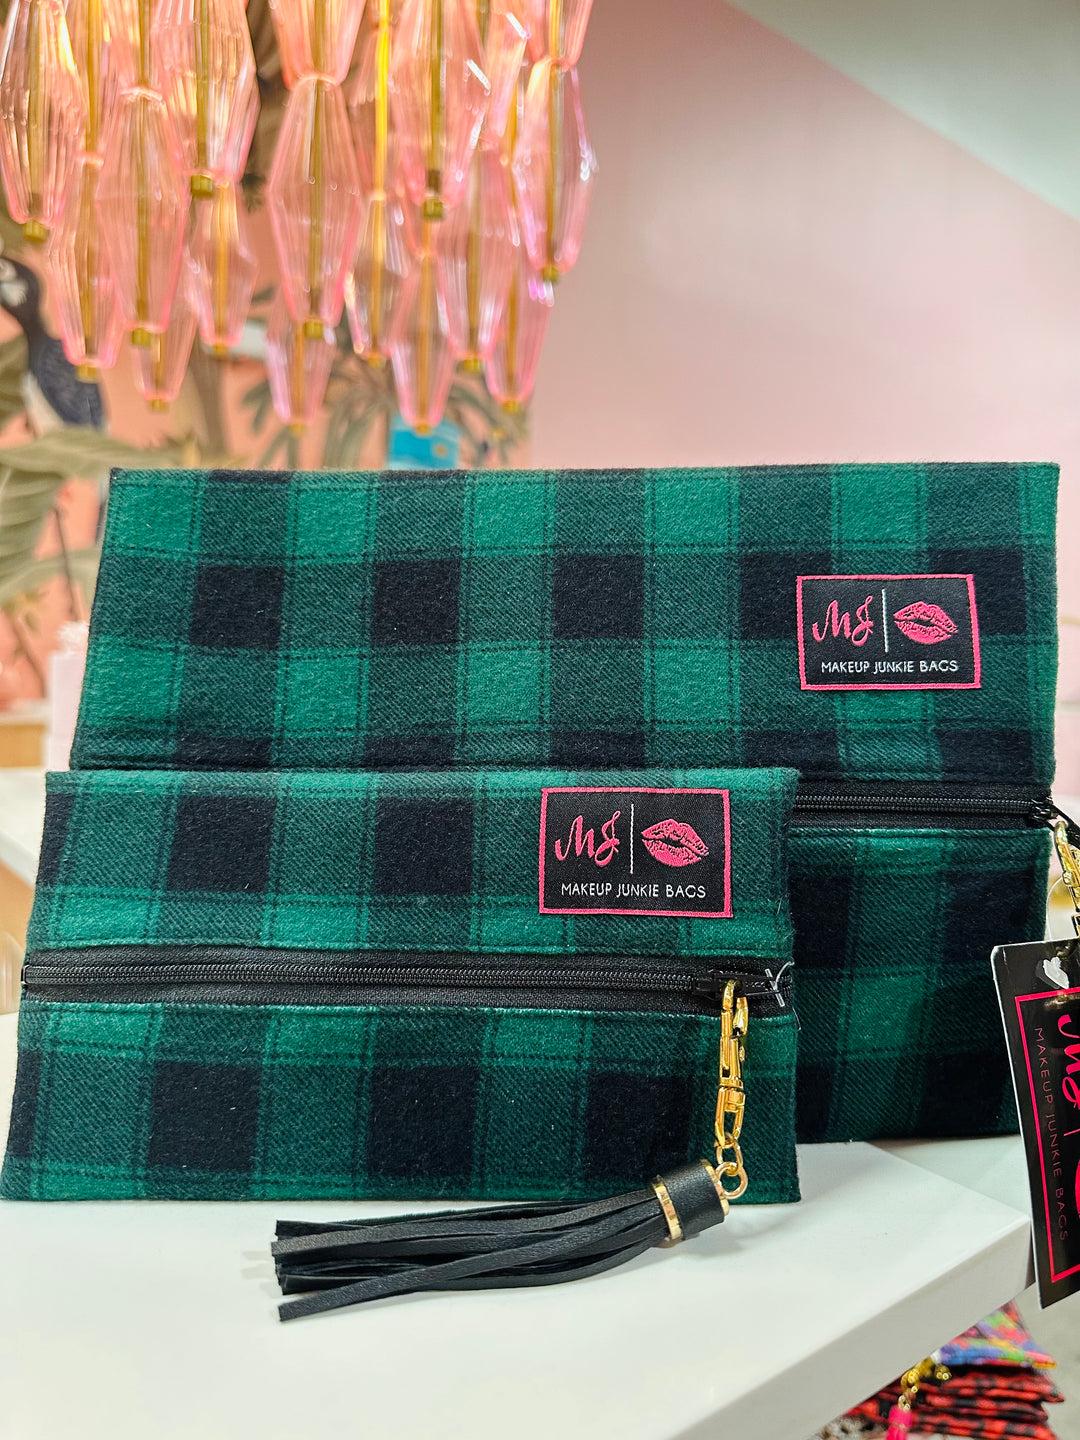 Makeup Junkie Bags - Highlander  [Ready to Ship]